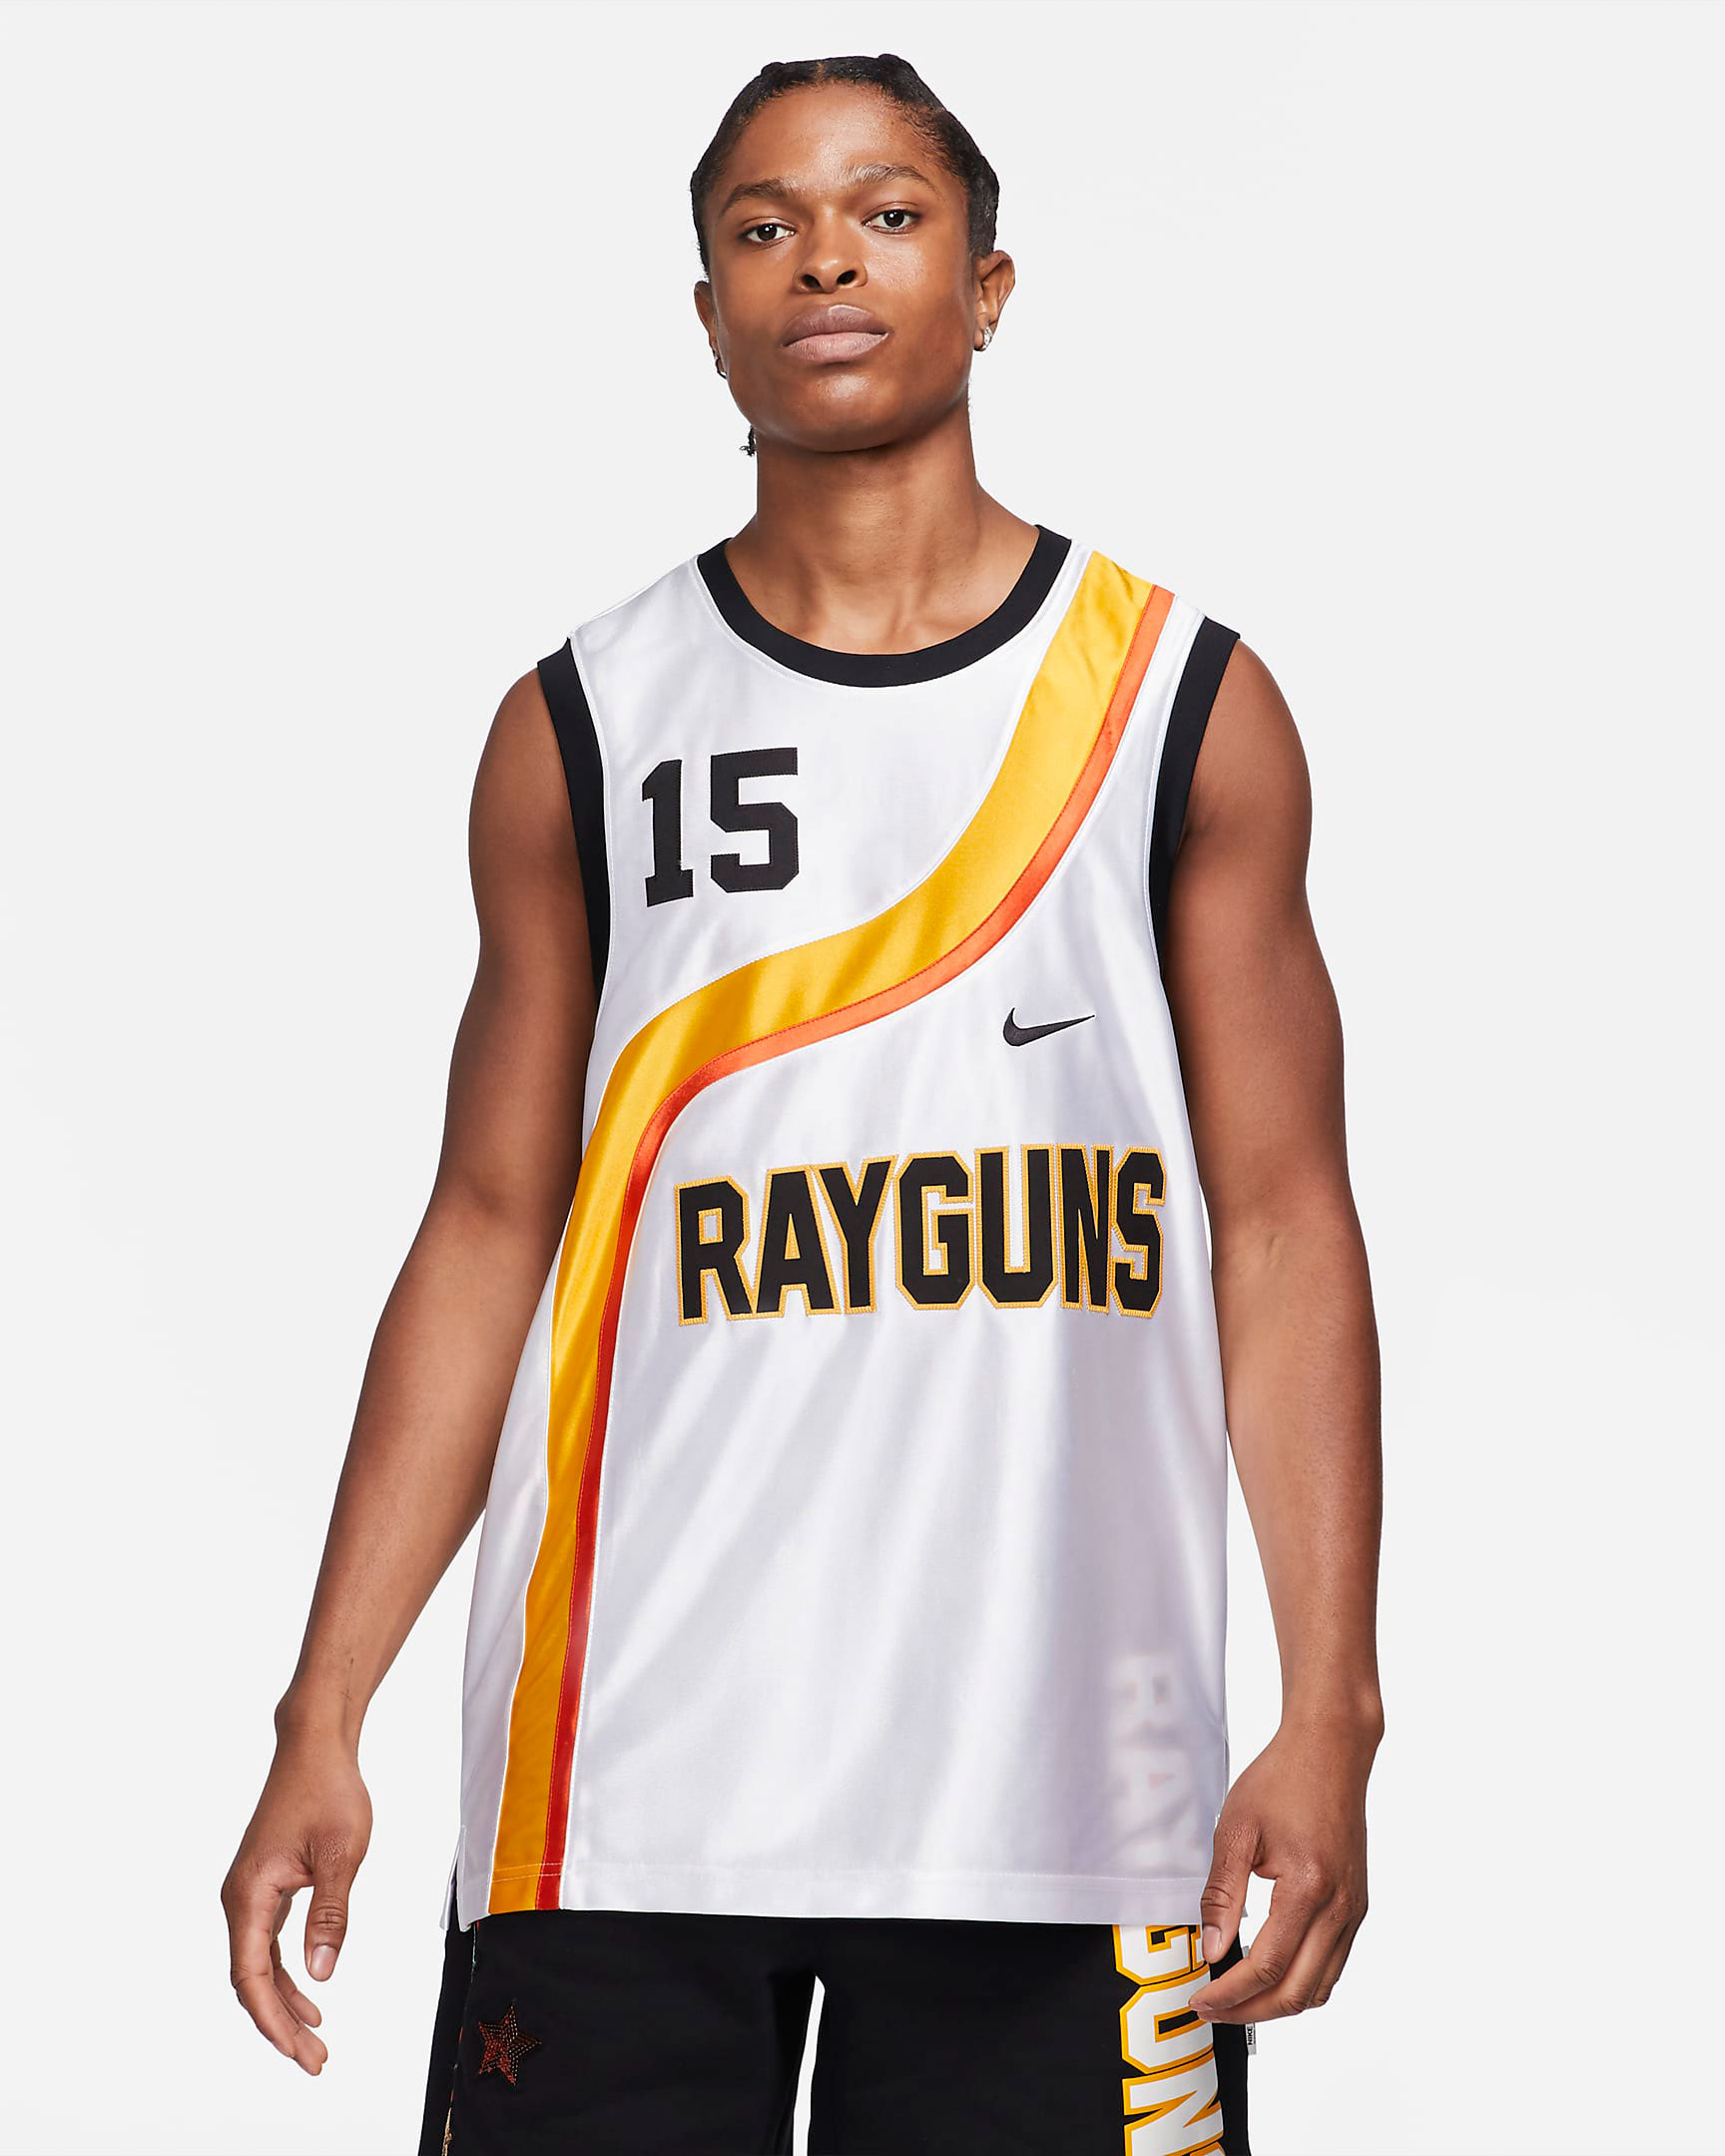 nike-roswell-rayguns-white-carter-jersey-1